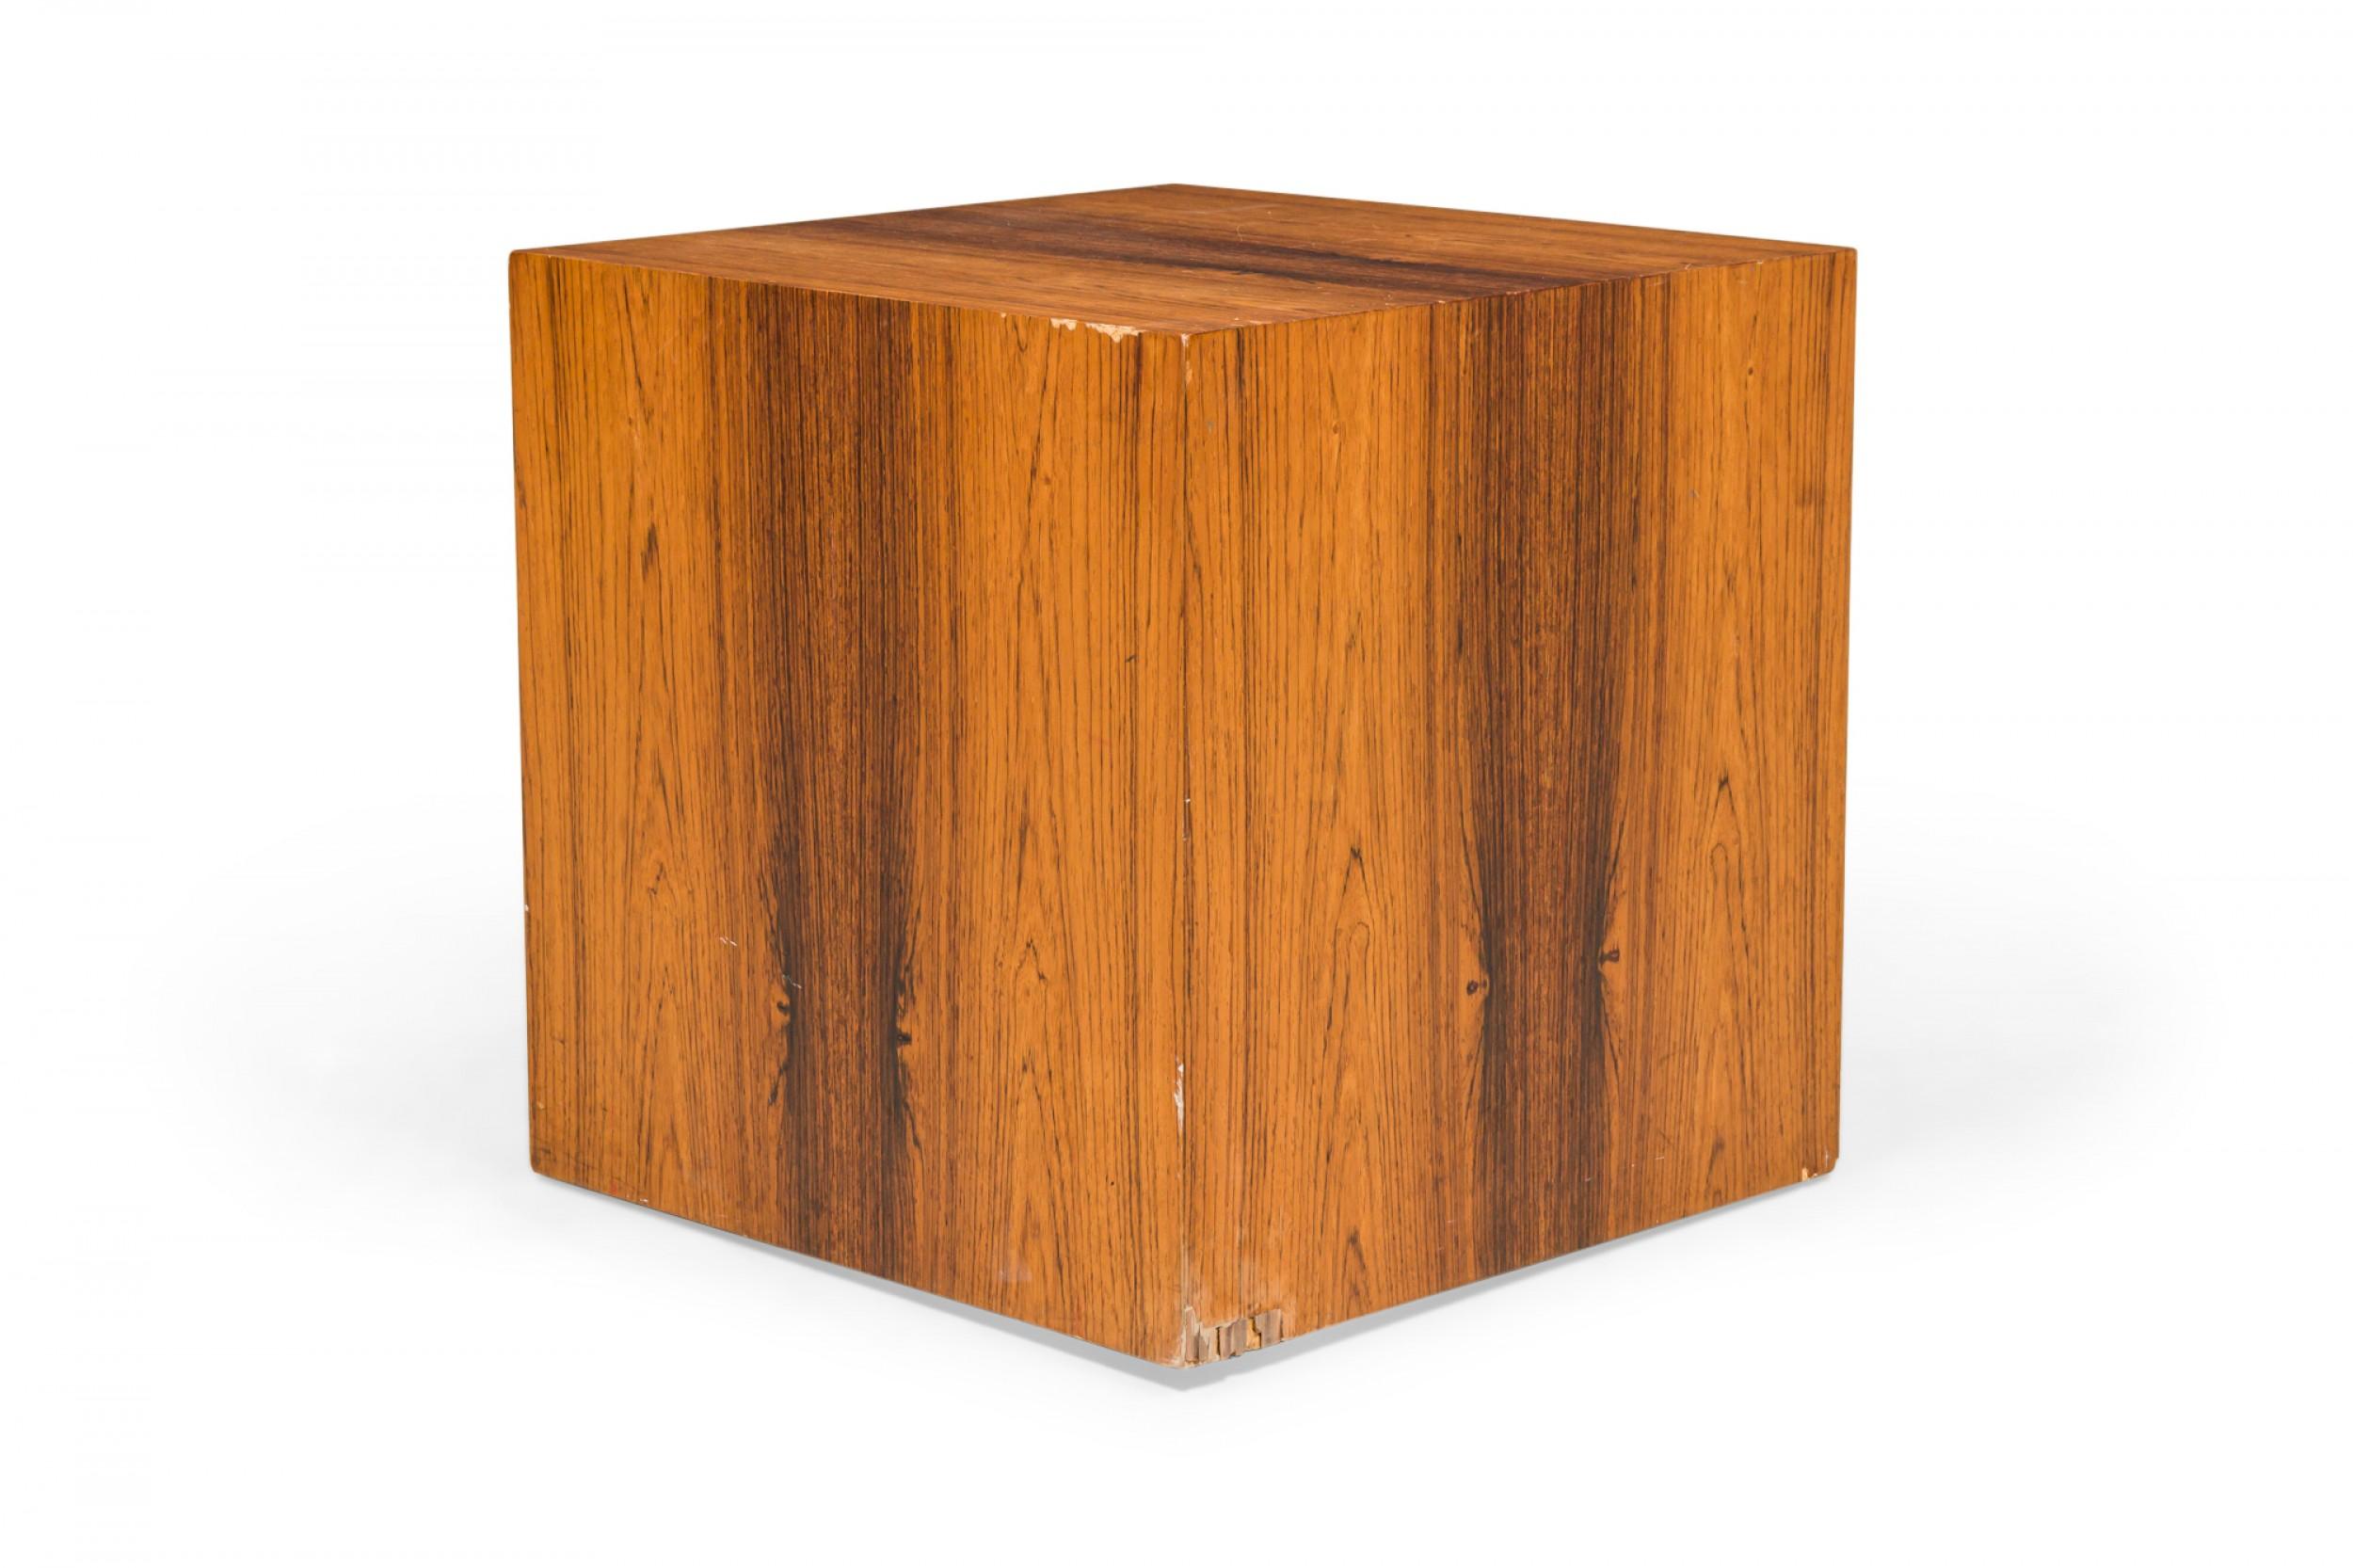 American Pair of Milo Baughman for Thayer Coggin Rosewood Veneer Cube End / Side Tables For Sale